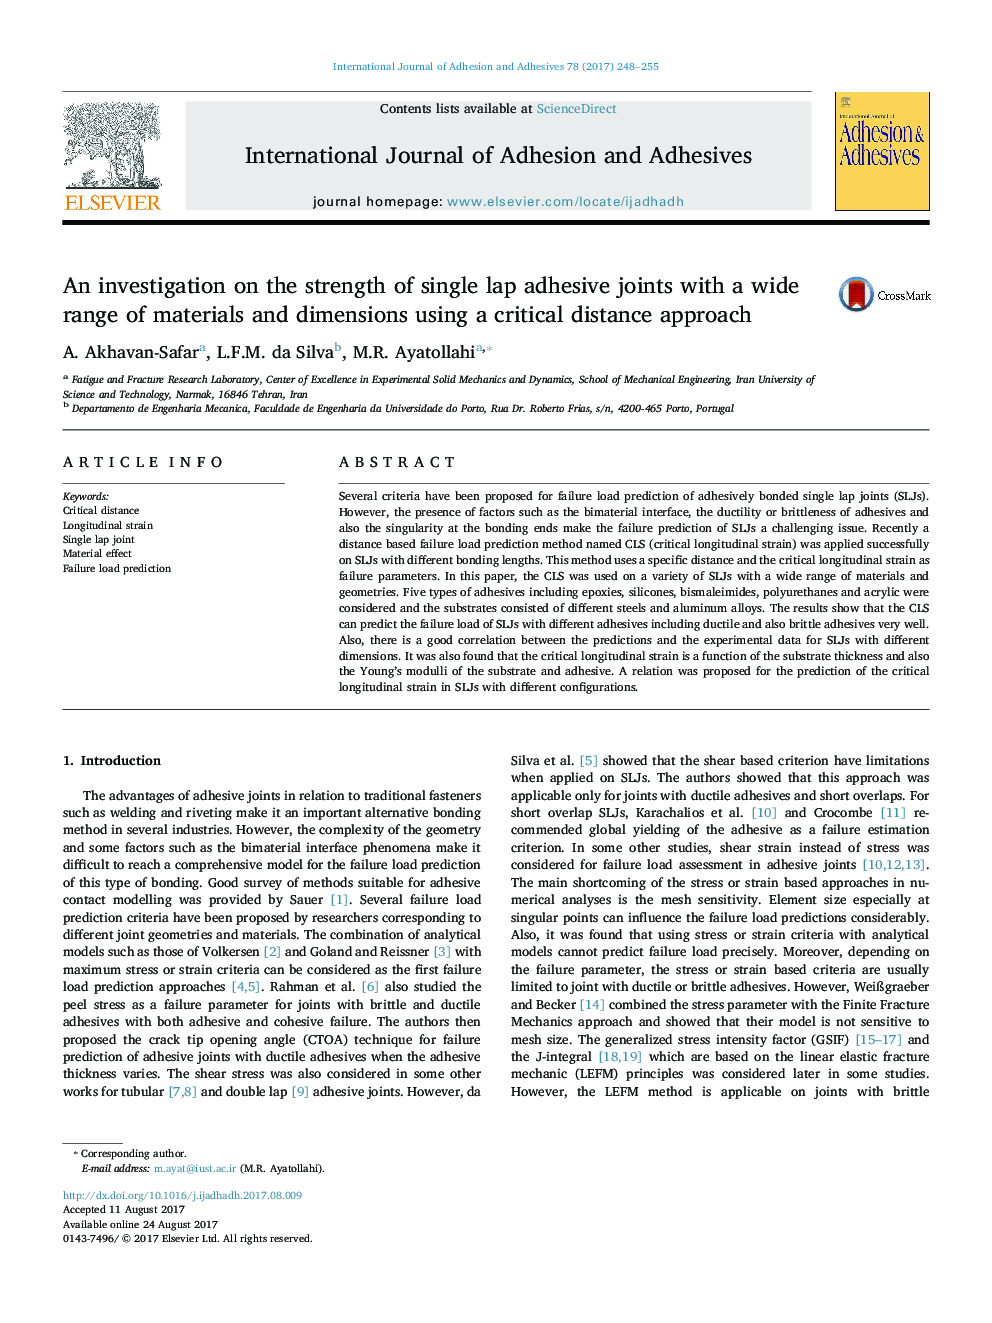 An investigation on the strength of single lap adhesive joints with a wide range of materials and dimensions using a critical distance approach